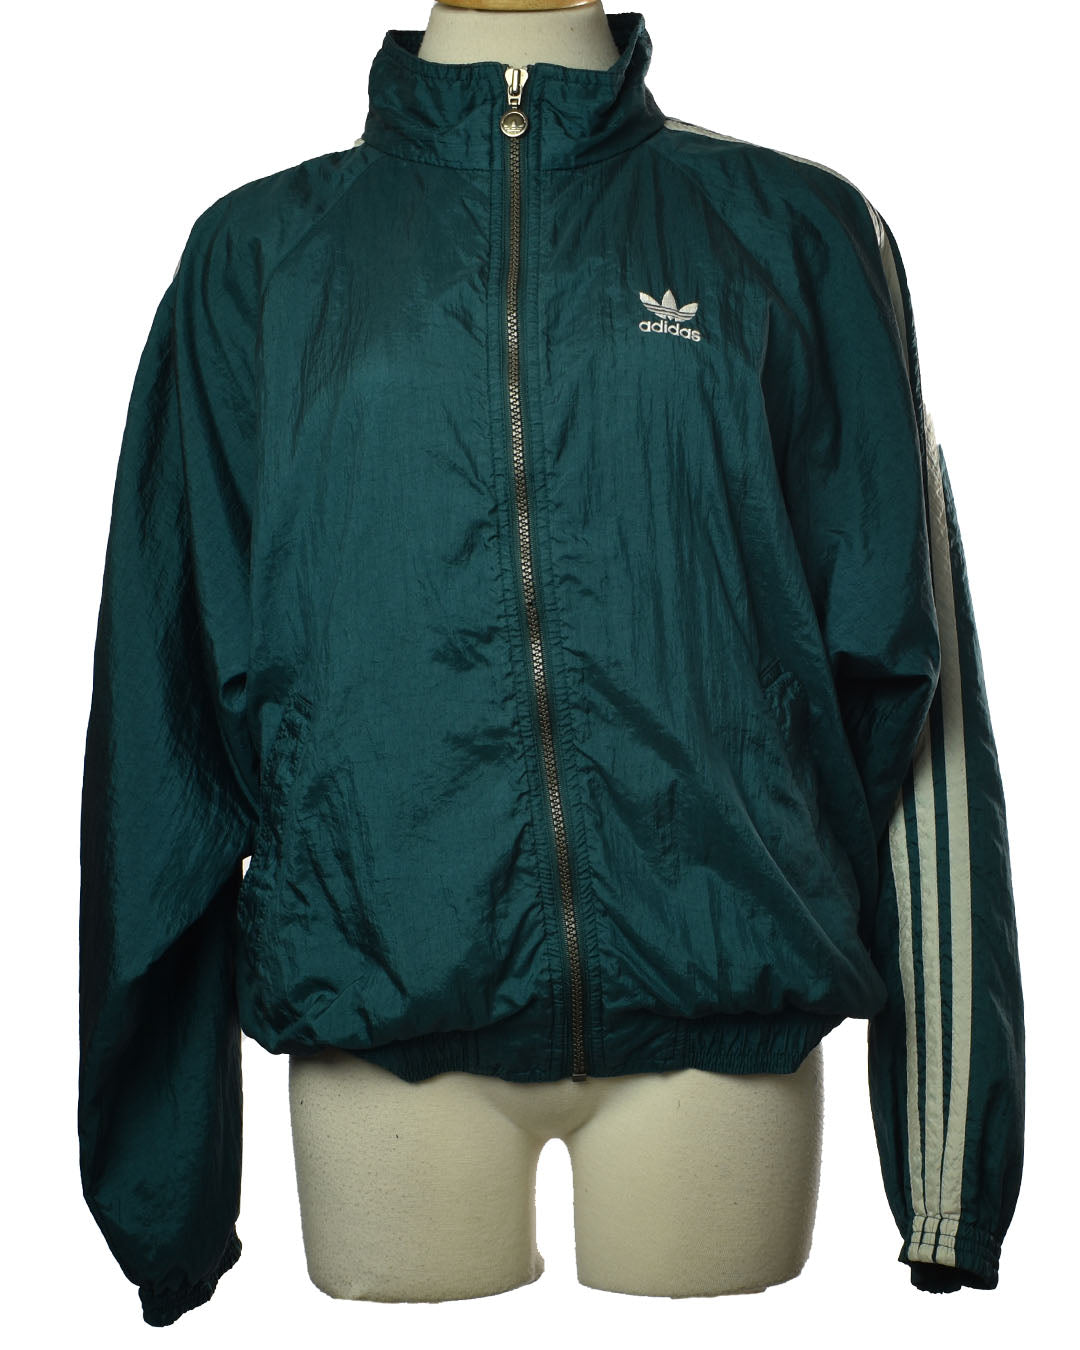 Vintage 90s Adidas Track Suit in Emerald Green Nylon Size M